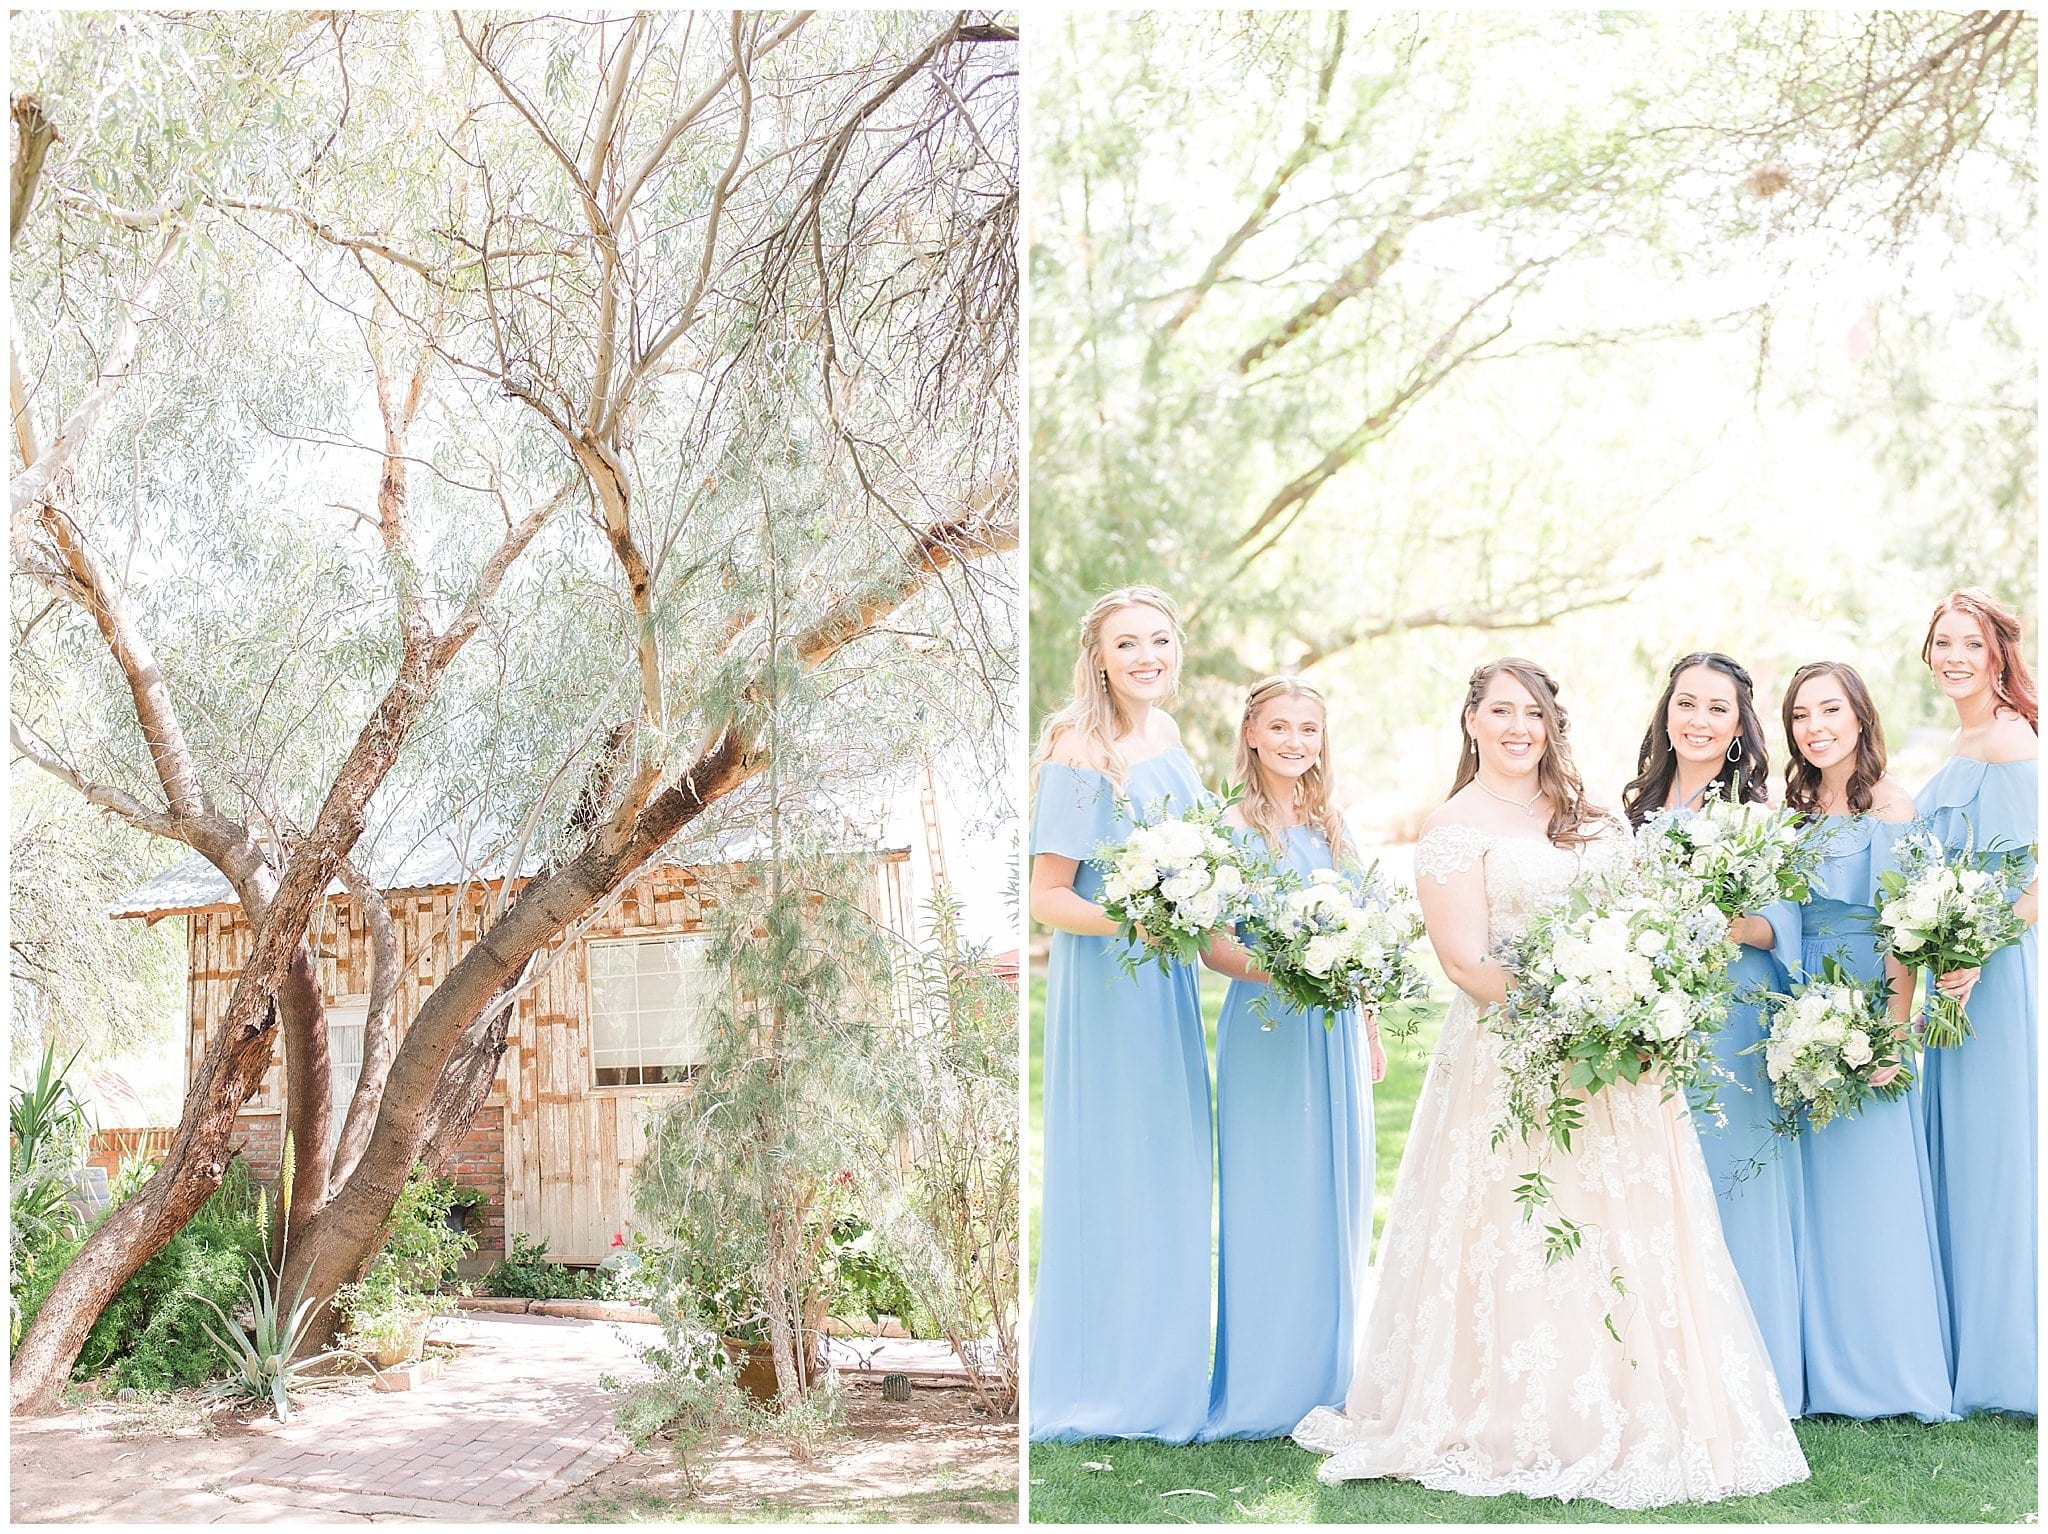 Windmill Winery Twisted Tree Ceremony Location | Bridesmaid Pictures | Bridal Bungalow